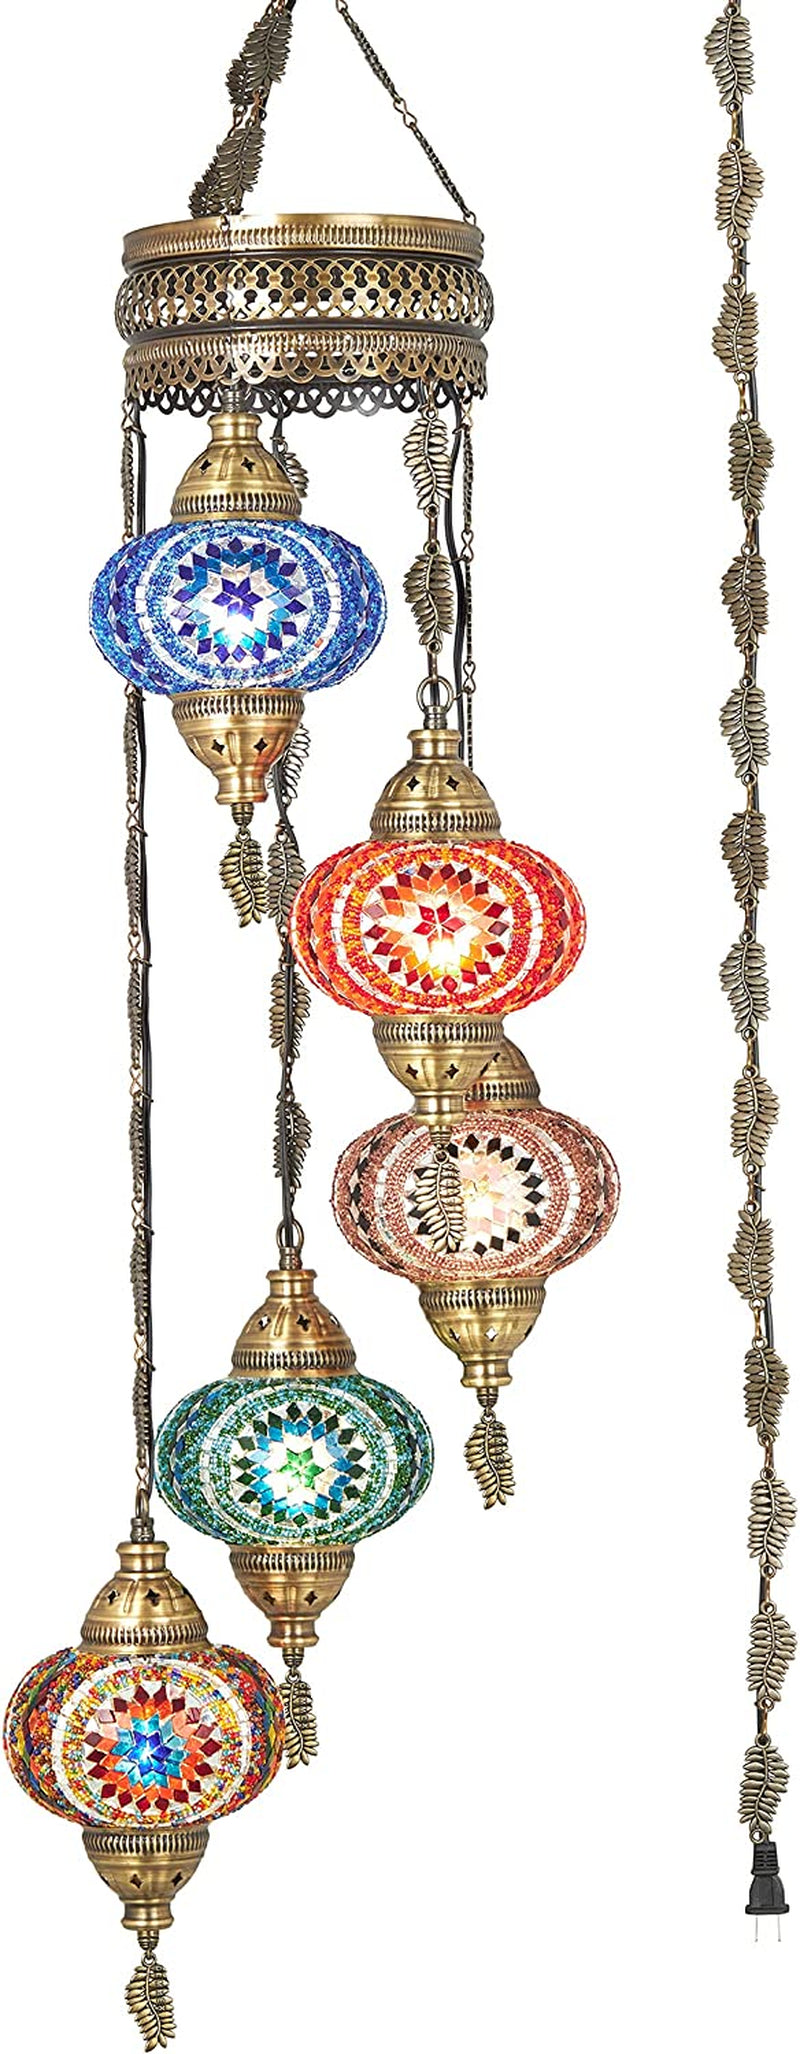 DEMMEX Swag Plug in Light, Turkish Moroccan Colorful Mosaic Wall Plug in Ceiling Hanging Light Chandelier Lighting with 15Feet Chain Cord & Plug, 5 Big Shades (Multi) Home & Garden > Lighting > Lighting Fixtures > Chandeliers DEMMEX   